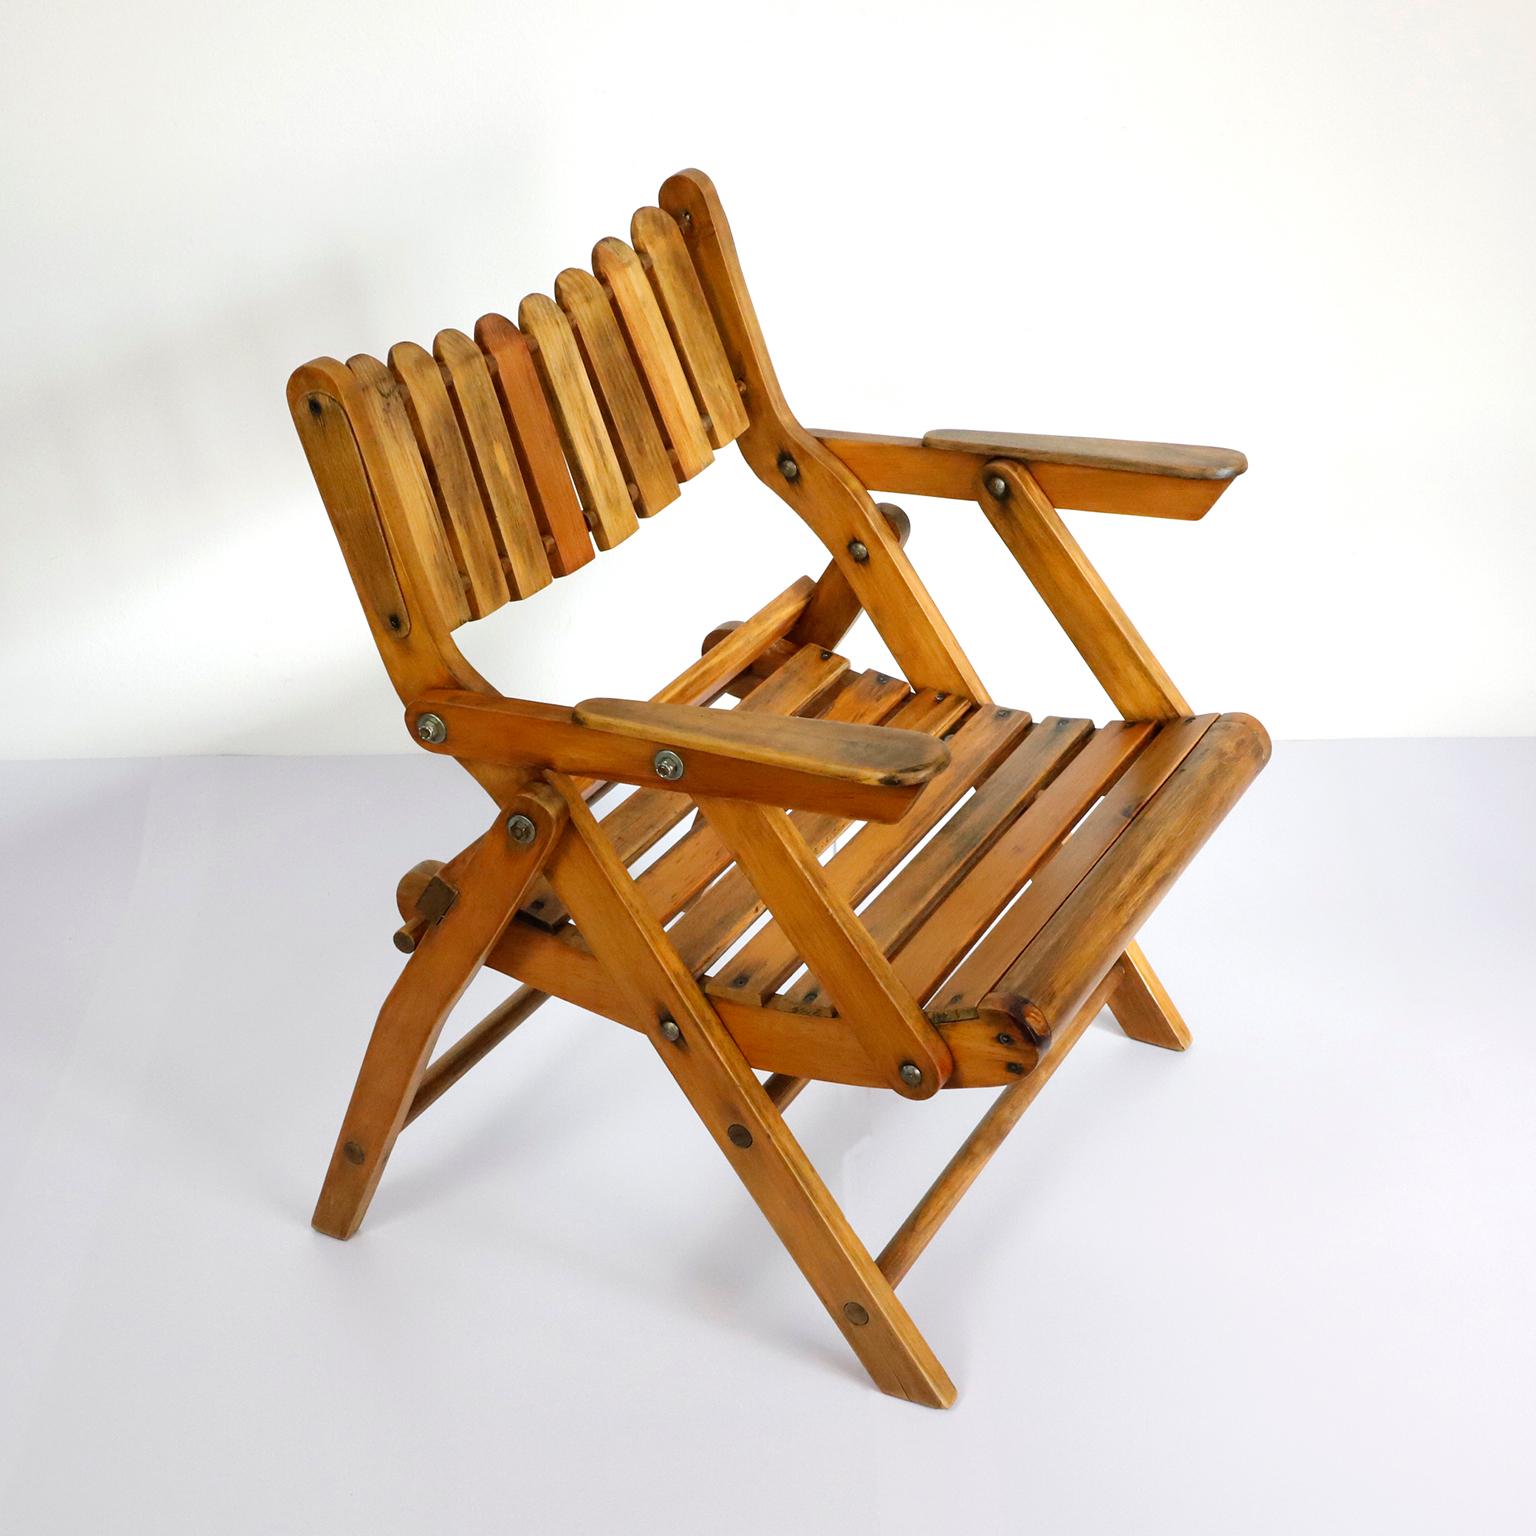 Circa 1960, we offer this pair of Mexican folding armchairs in pine wood. Recently restored.